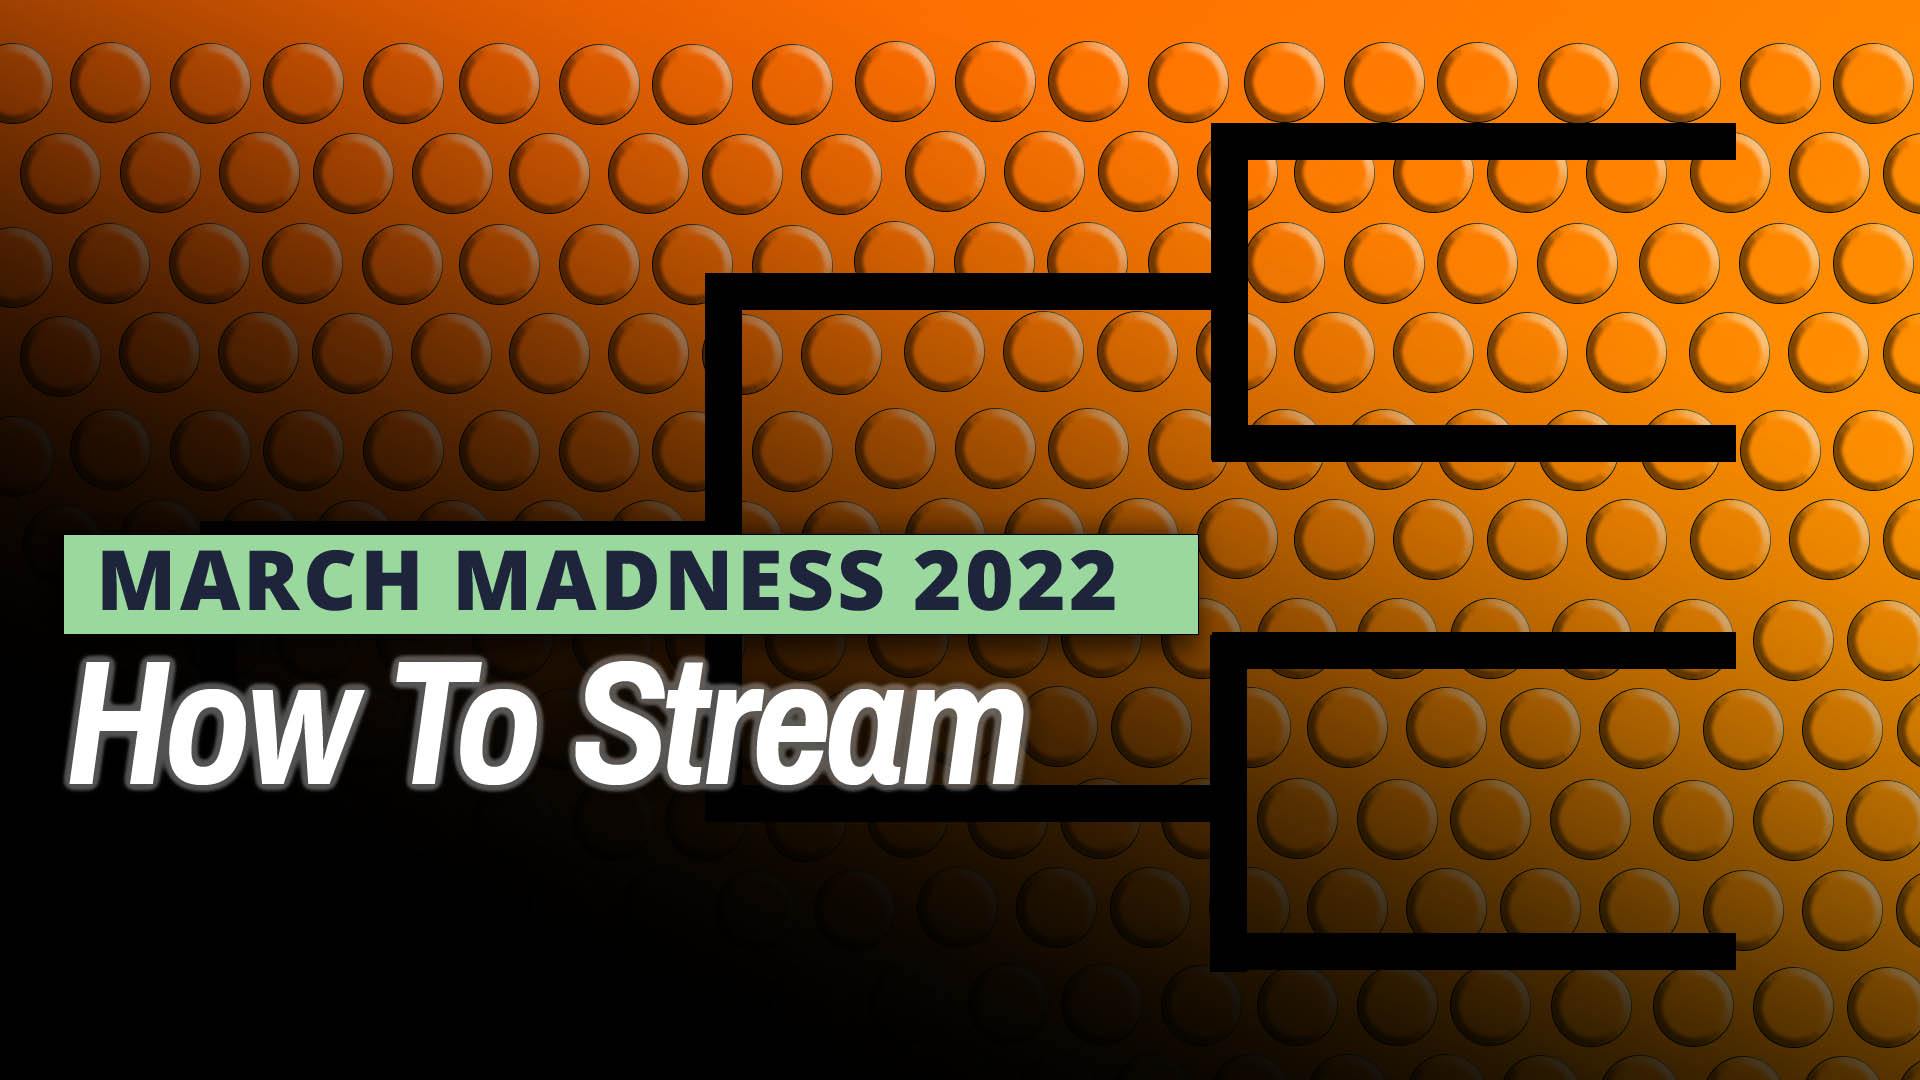 Site College Basketball - How to Stream March Madness 2022 copy